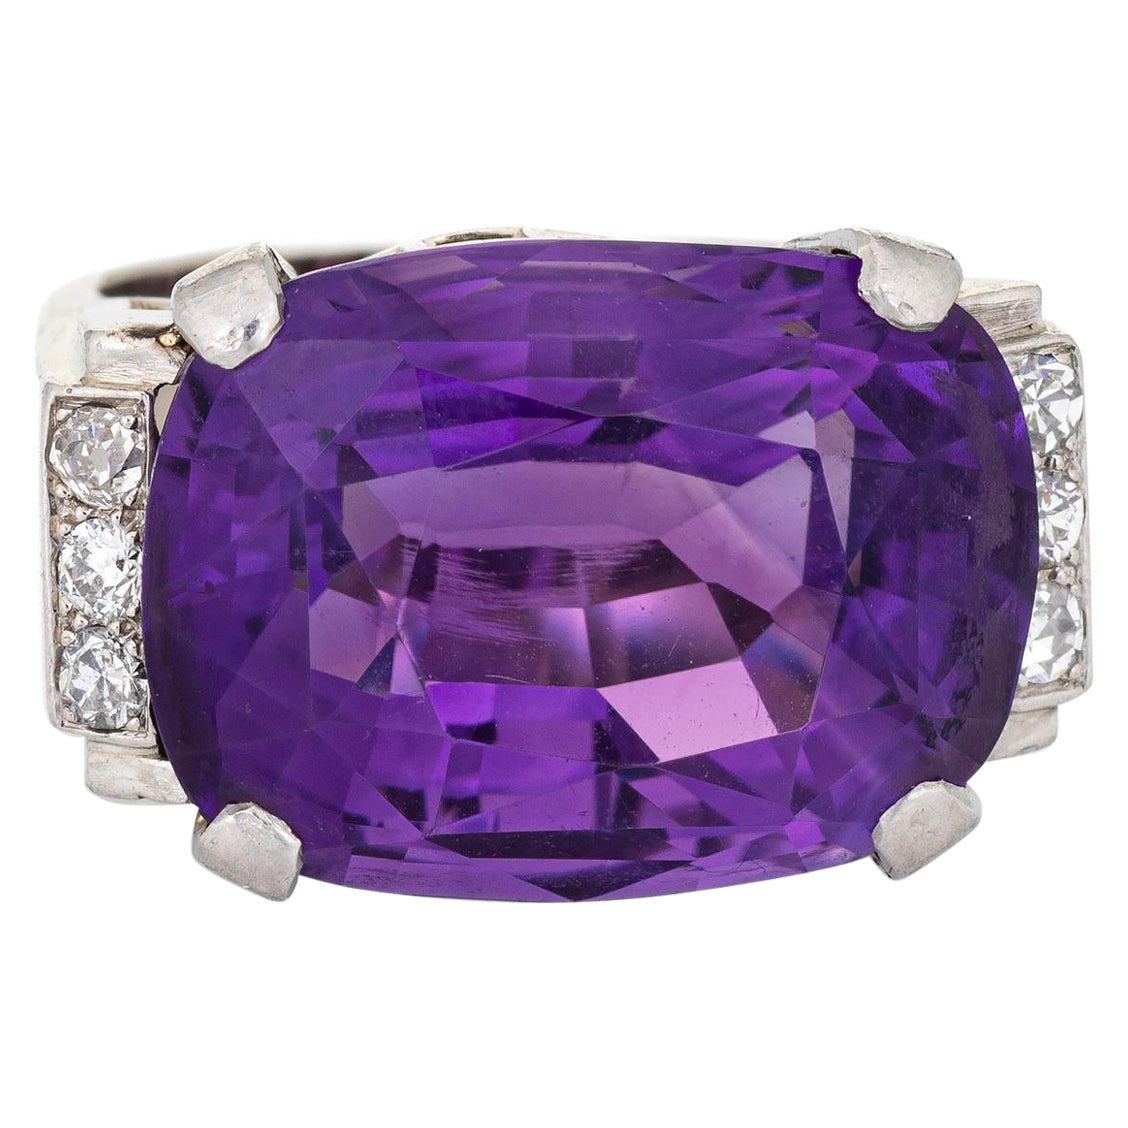 Vintage Amethyst Diamond Ring East West 14k White Gold Sz 5 Cocktail Jewelry  For Sale